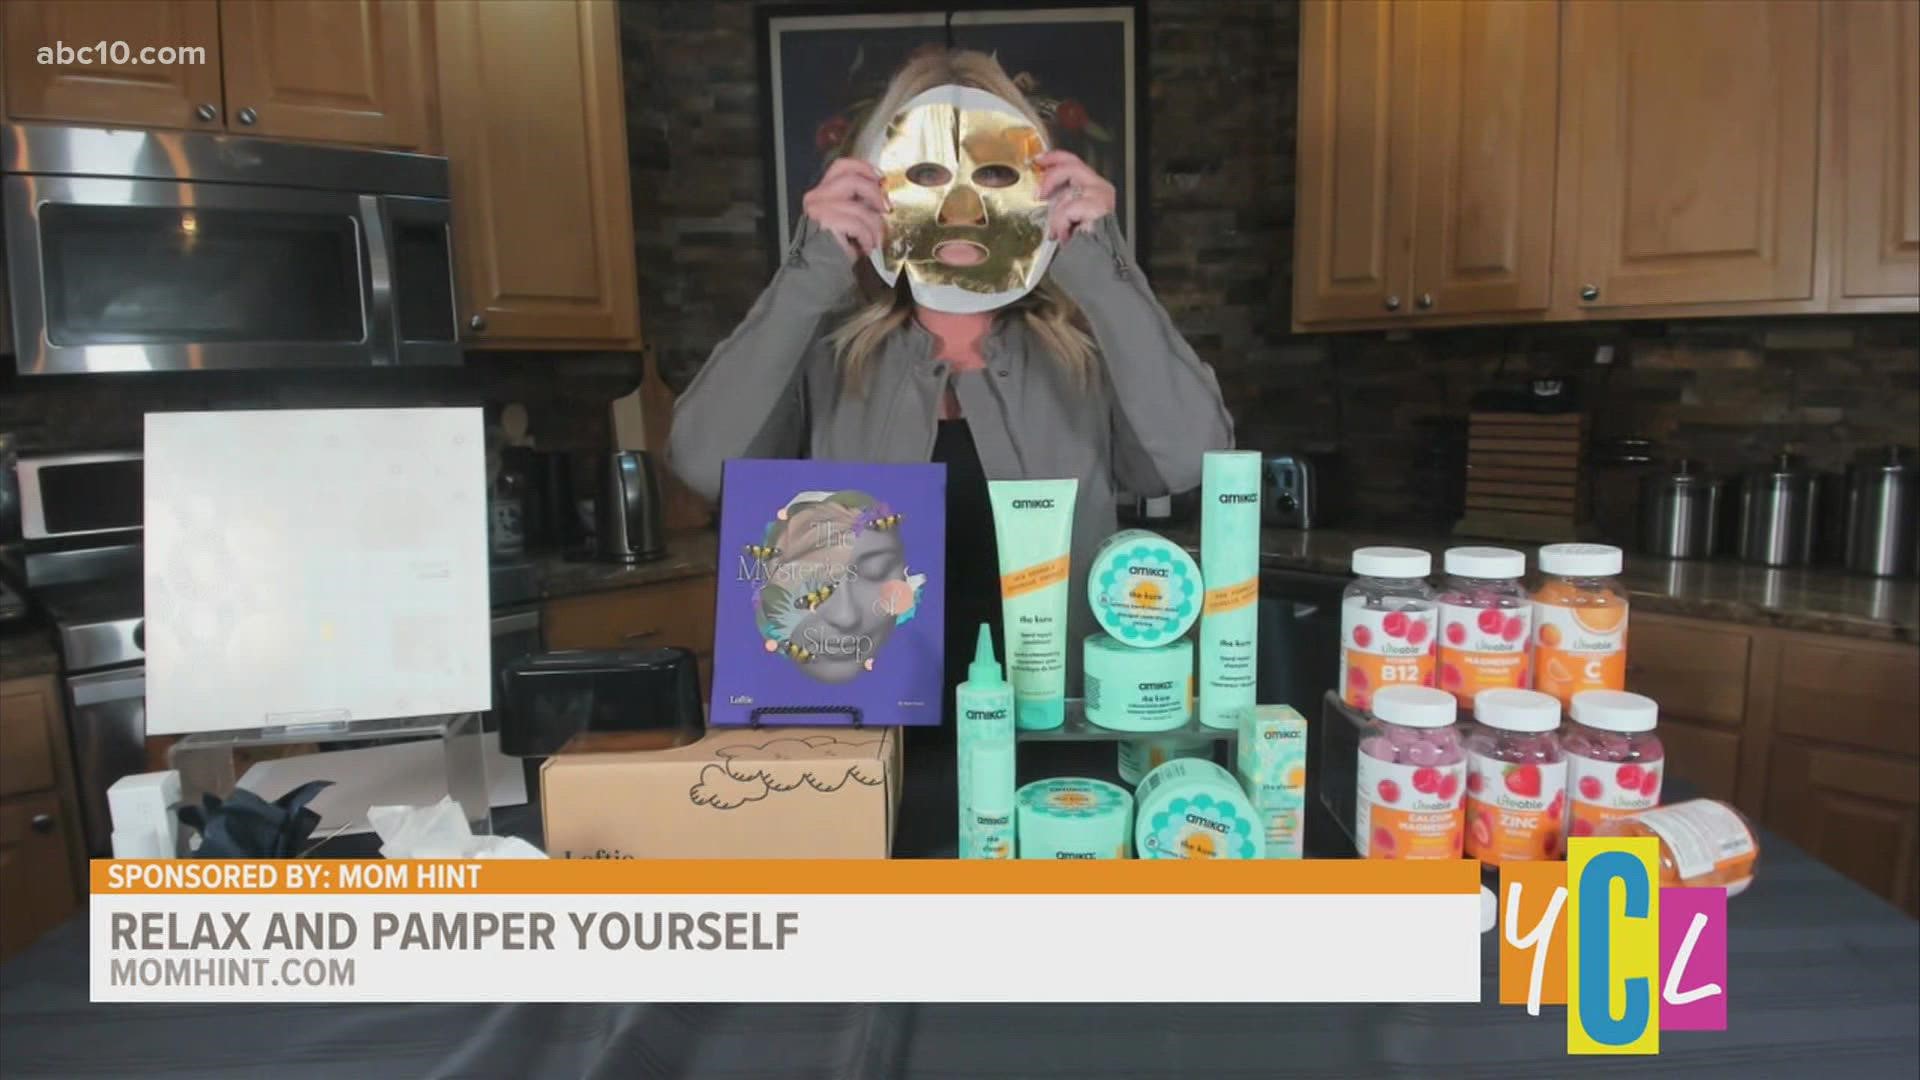 Make some me time! We're getting a "mom hint" rundown on ways to pamper and spoil yourself this Fall! This segment paid for by MomHint.